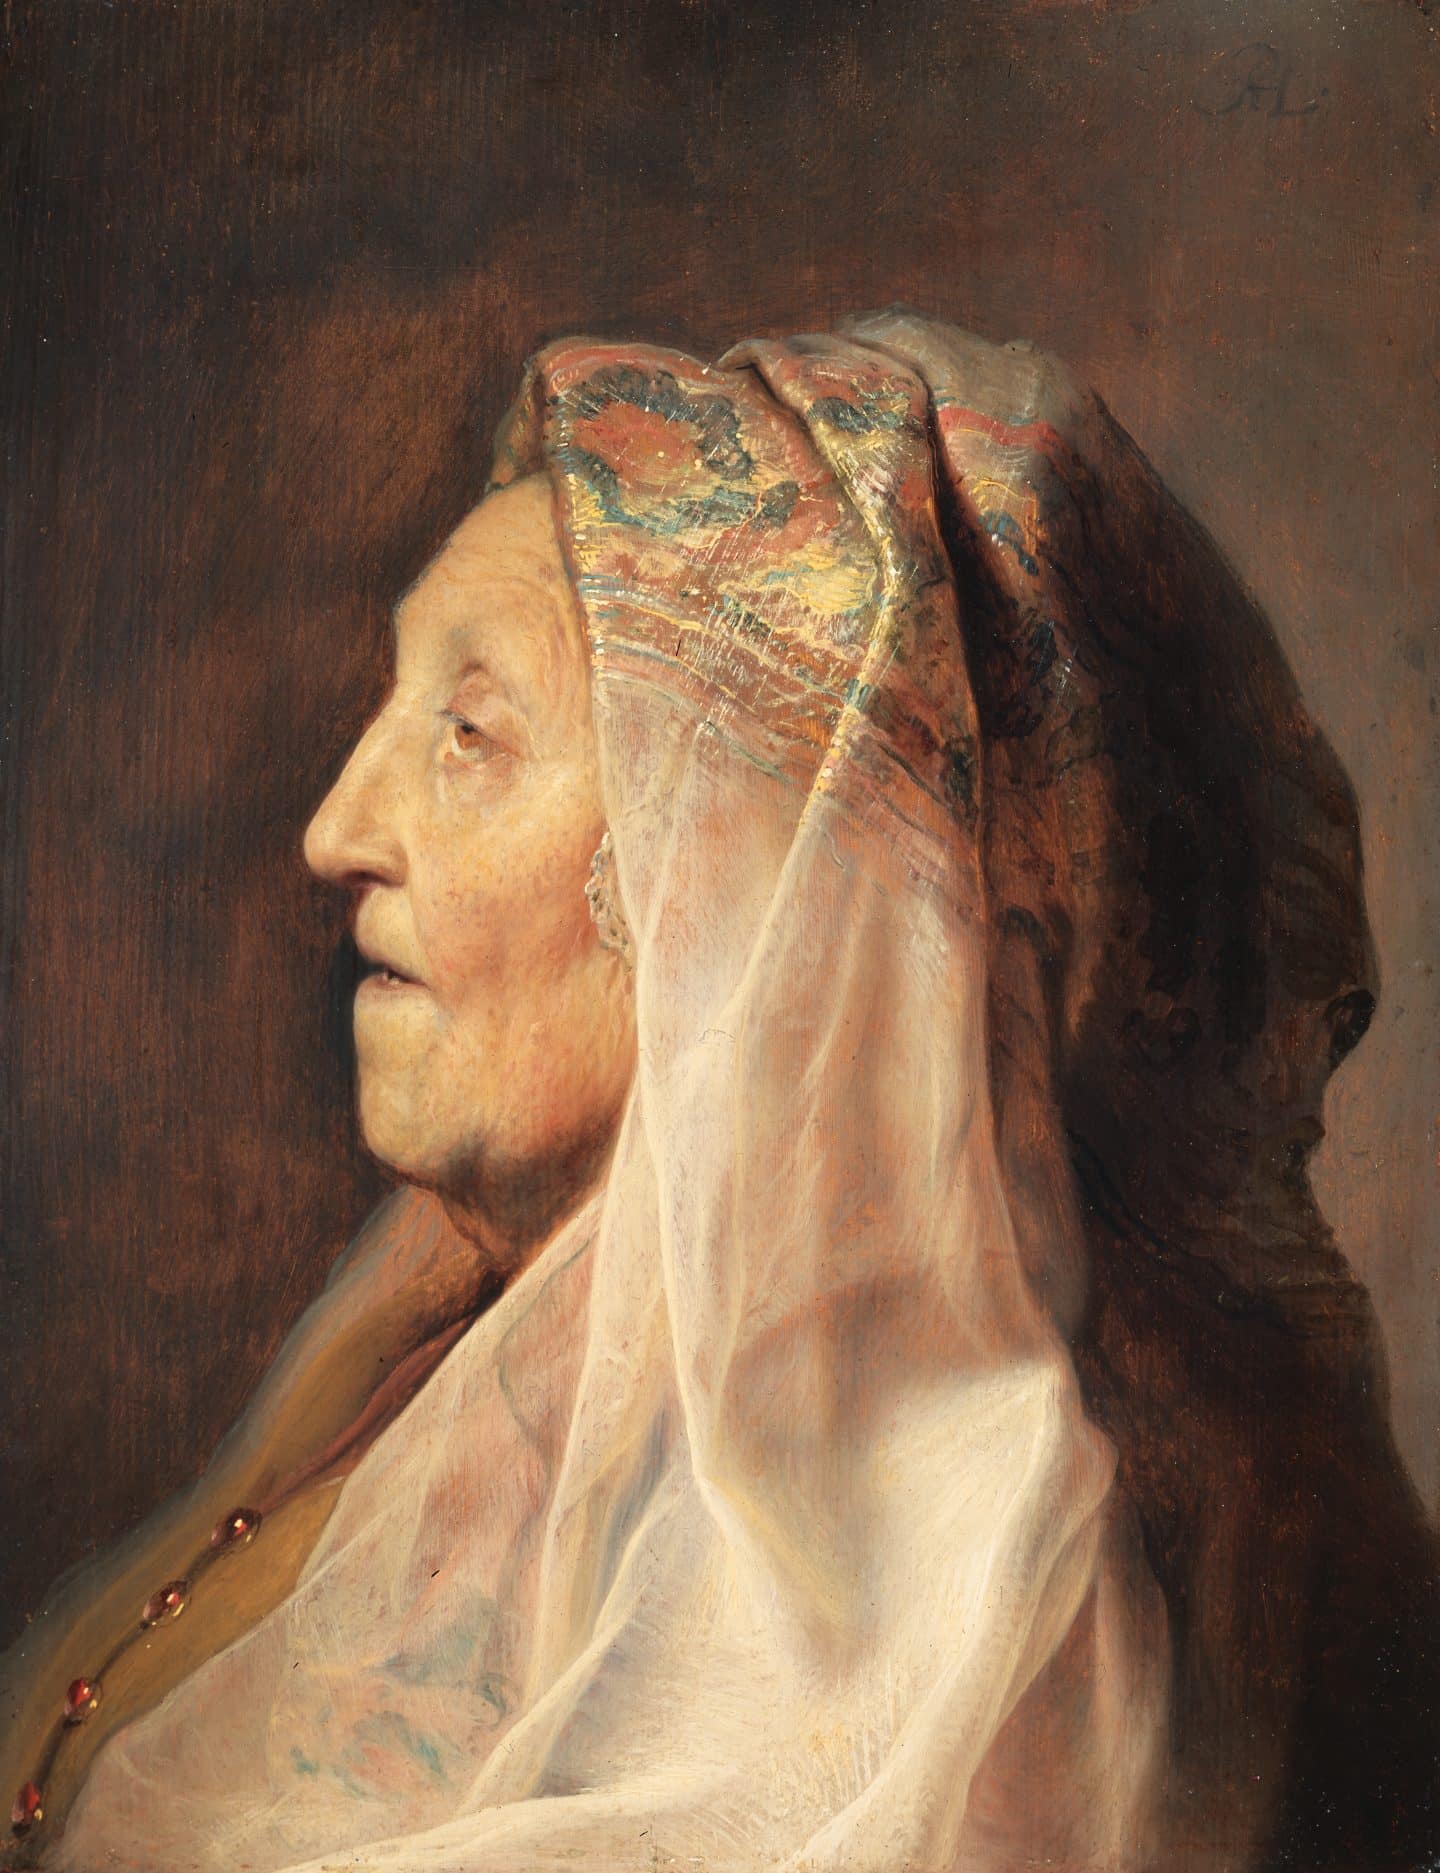 Head of an elderly woman, with an ornately decorated veil of fine translucent fabric placed over her head.